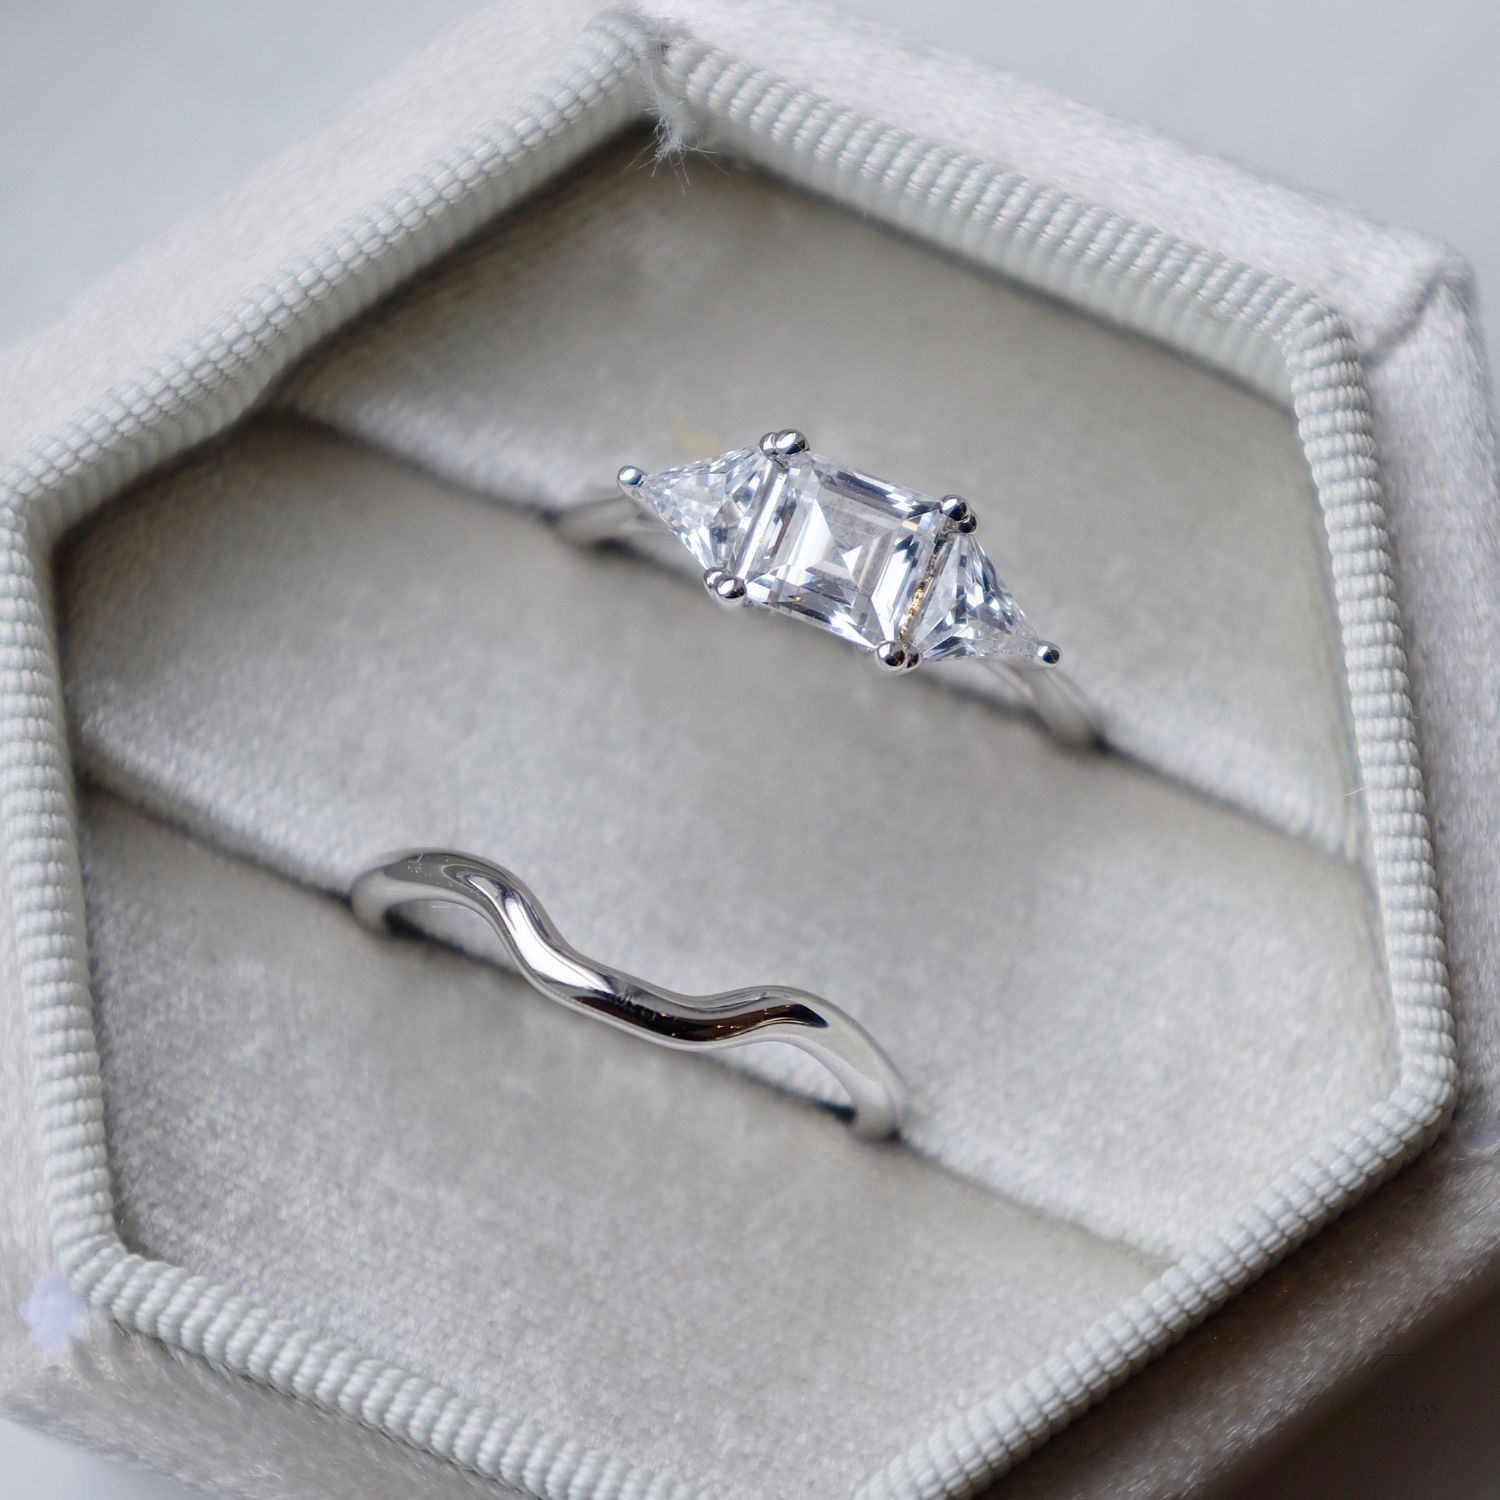 Custom Diamond Engagement Ring Set in Salt Lake City by Timeless Design and Jewelry